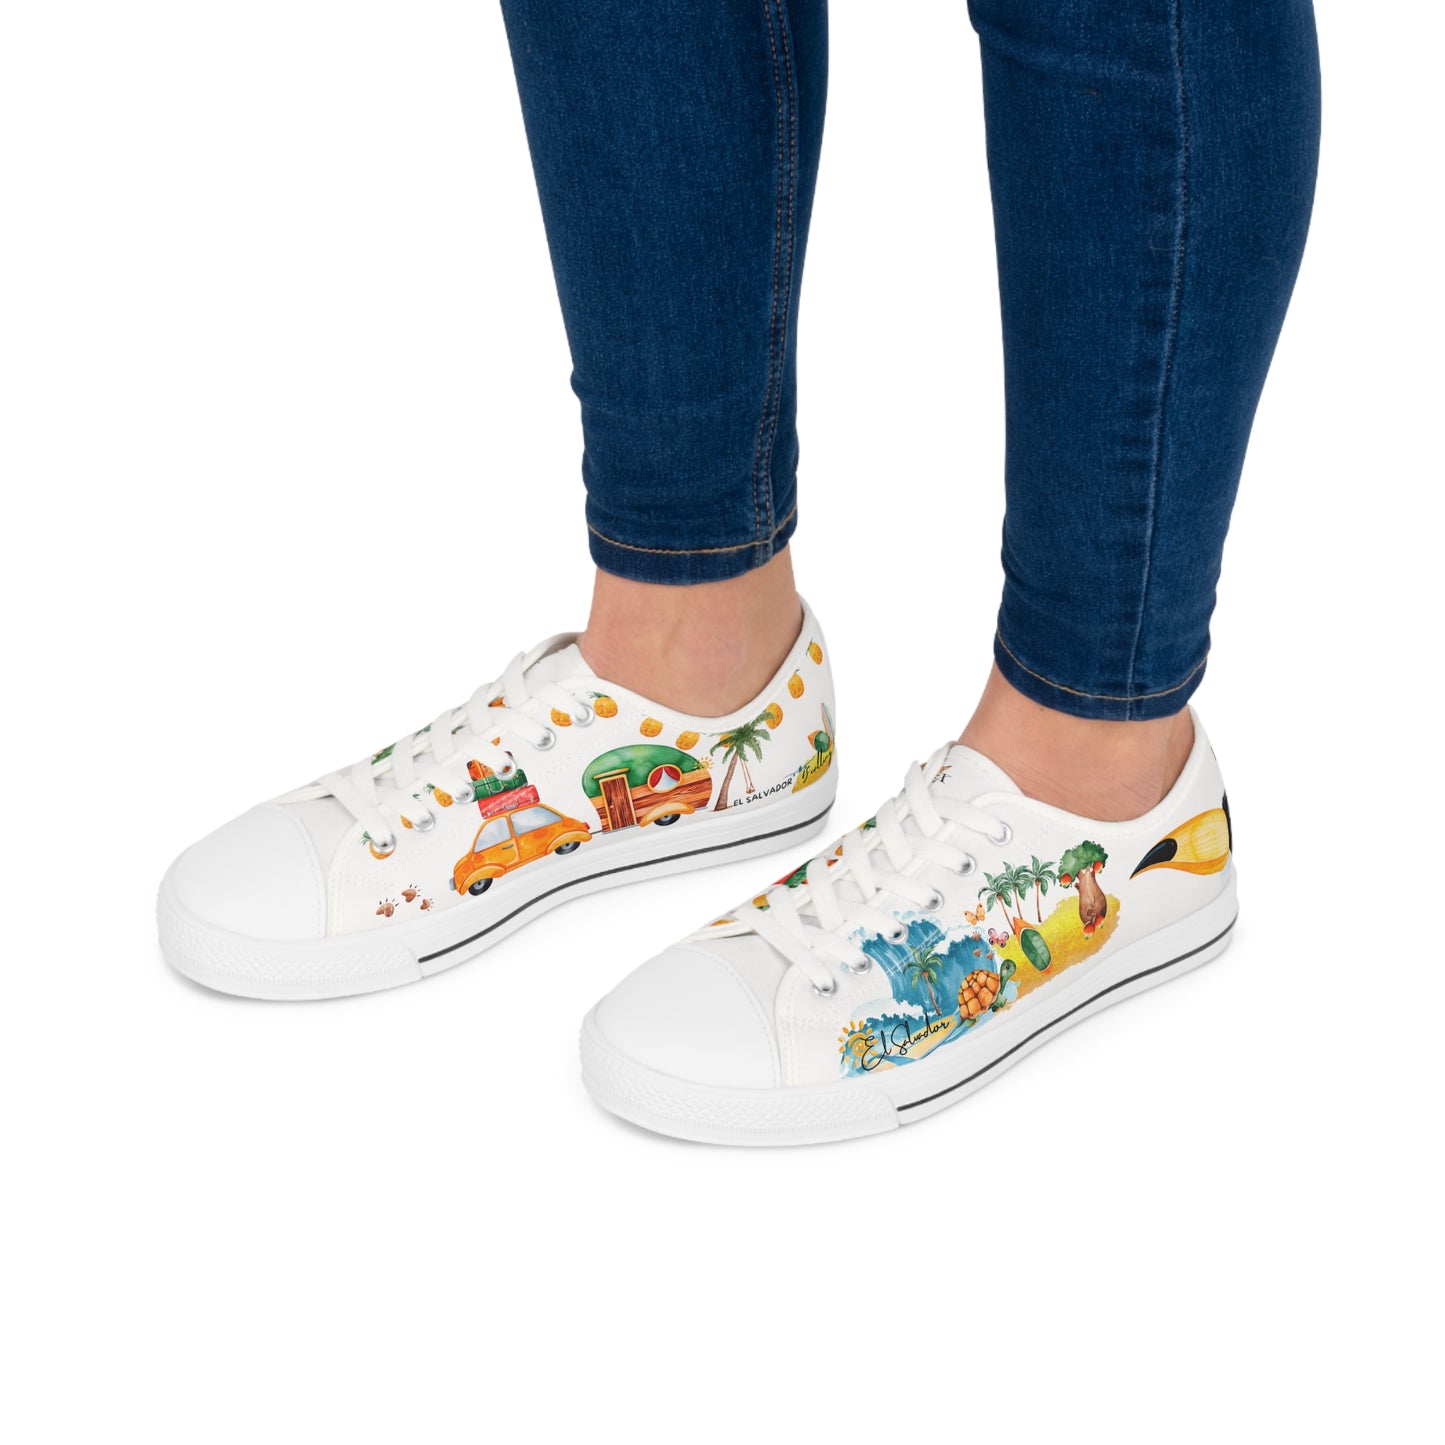 El Salvador is calling & i must Go- Travel Edition - White Background Sneakers